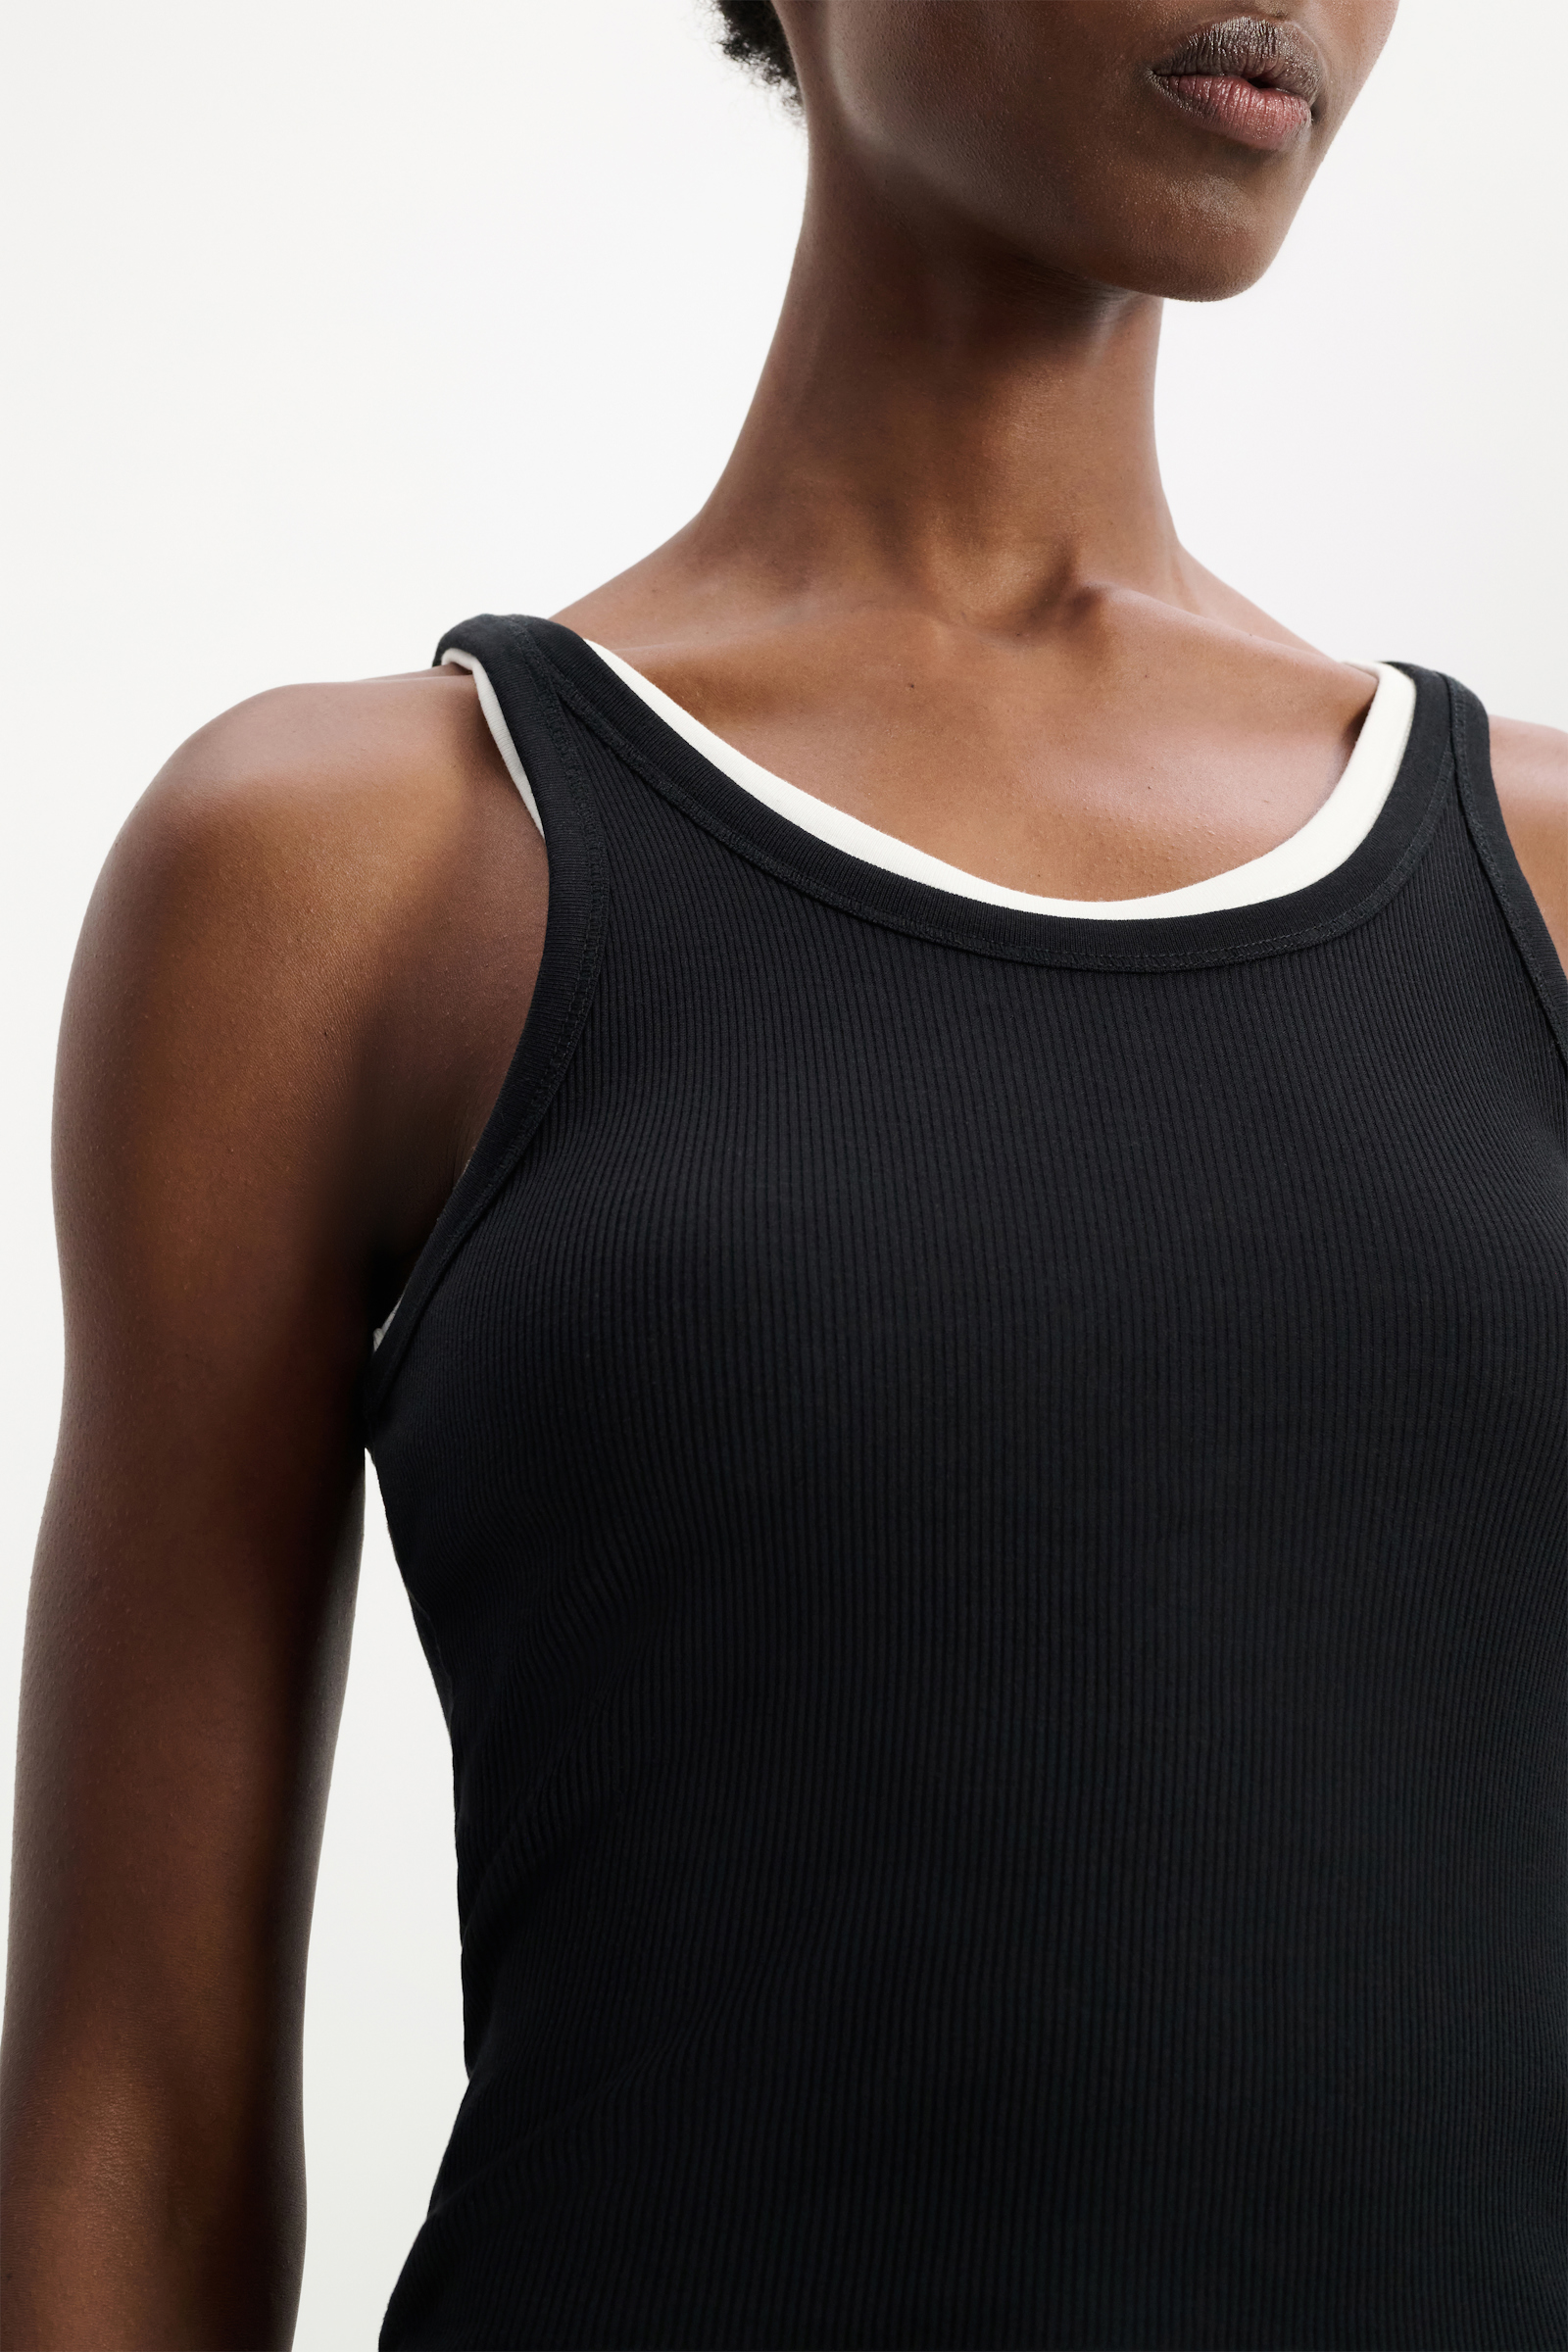 Dorothee Schumacher Ribbed cotton tank top pure black